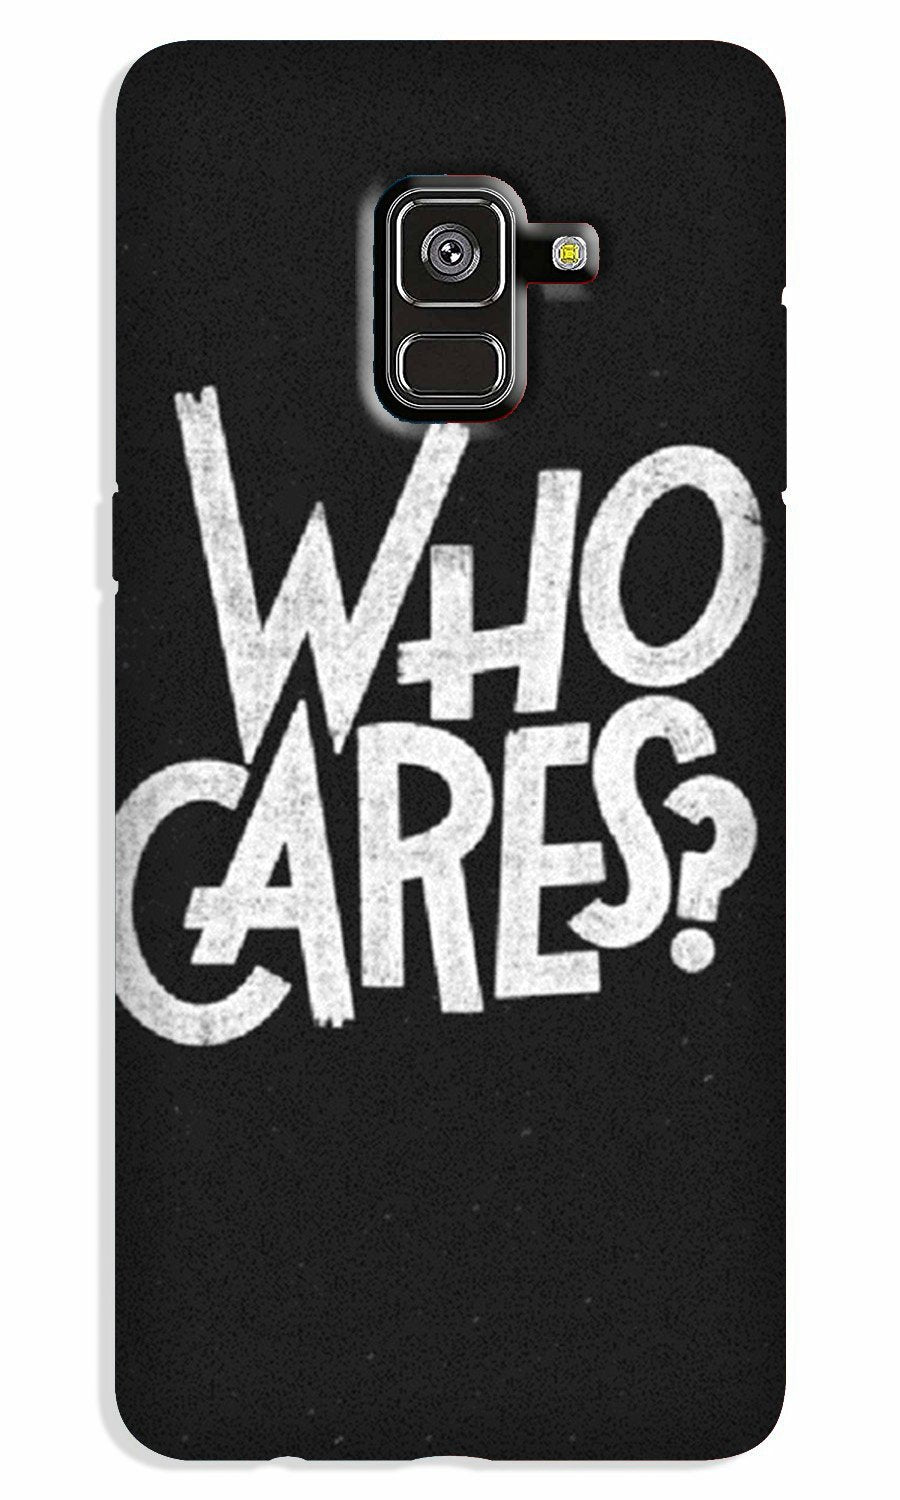 Who Cares Case for Galaxy A6